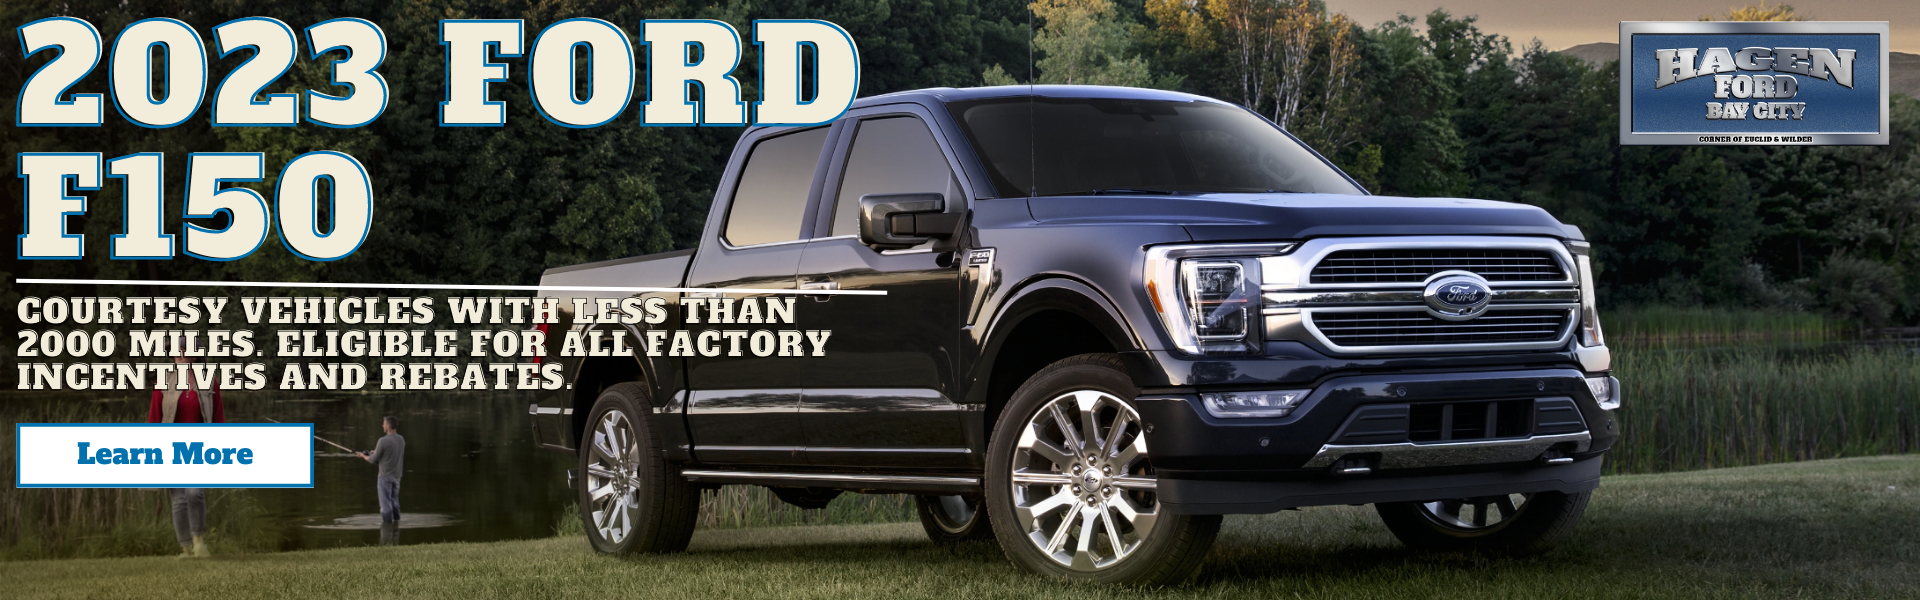 2023 Ford F150 Courtesy Vehicles